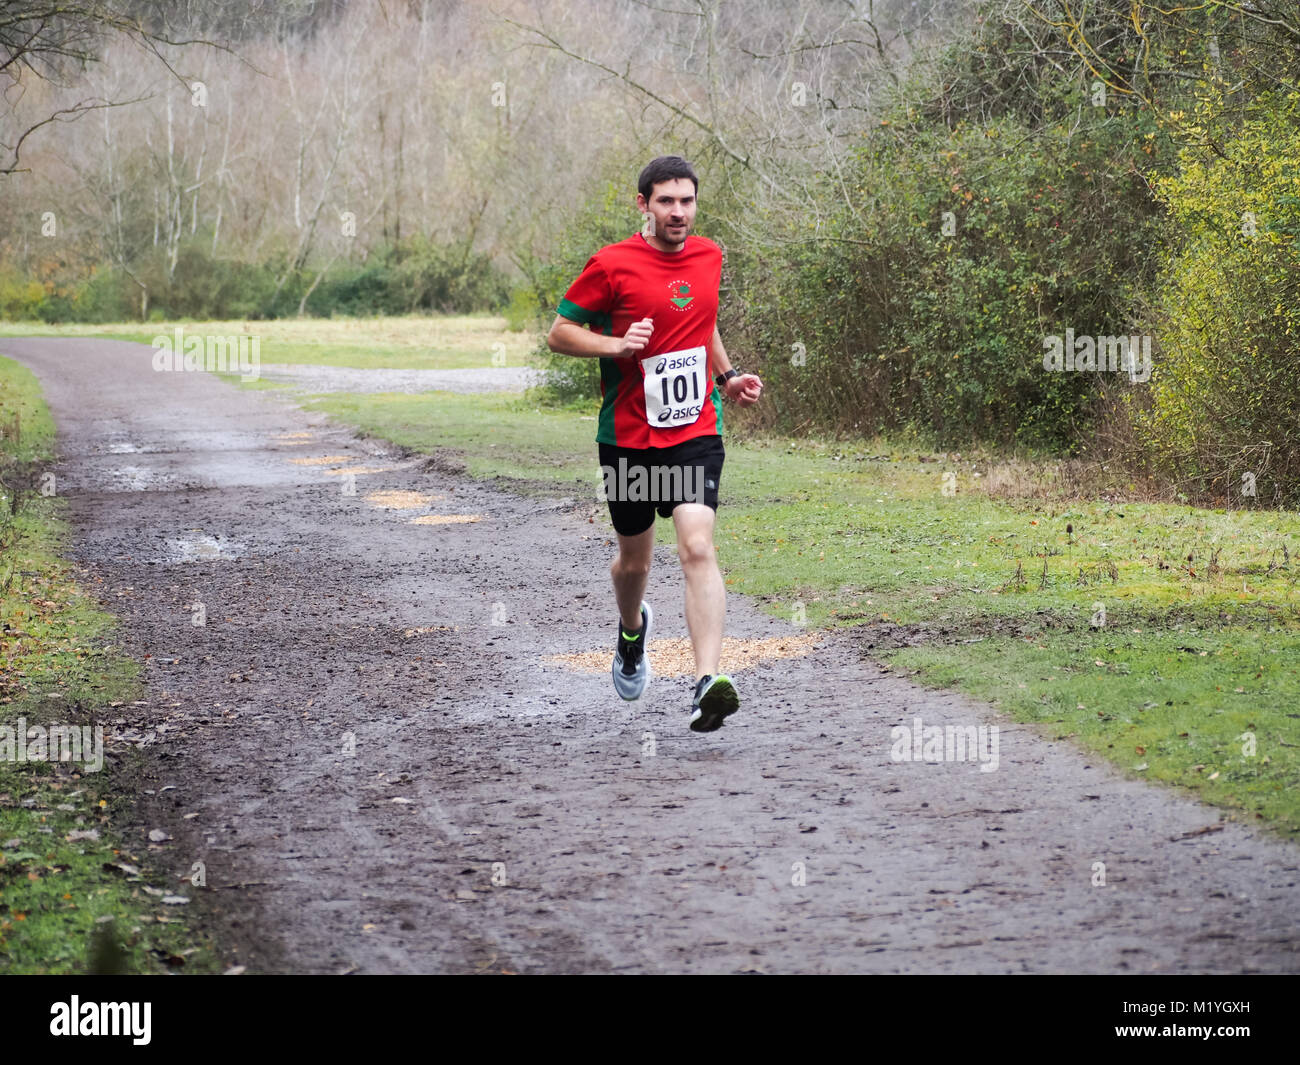 A runner taking part in a off raod, trail race Stock Photo